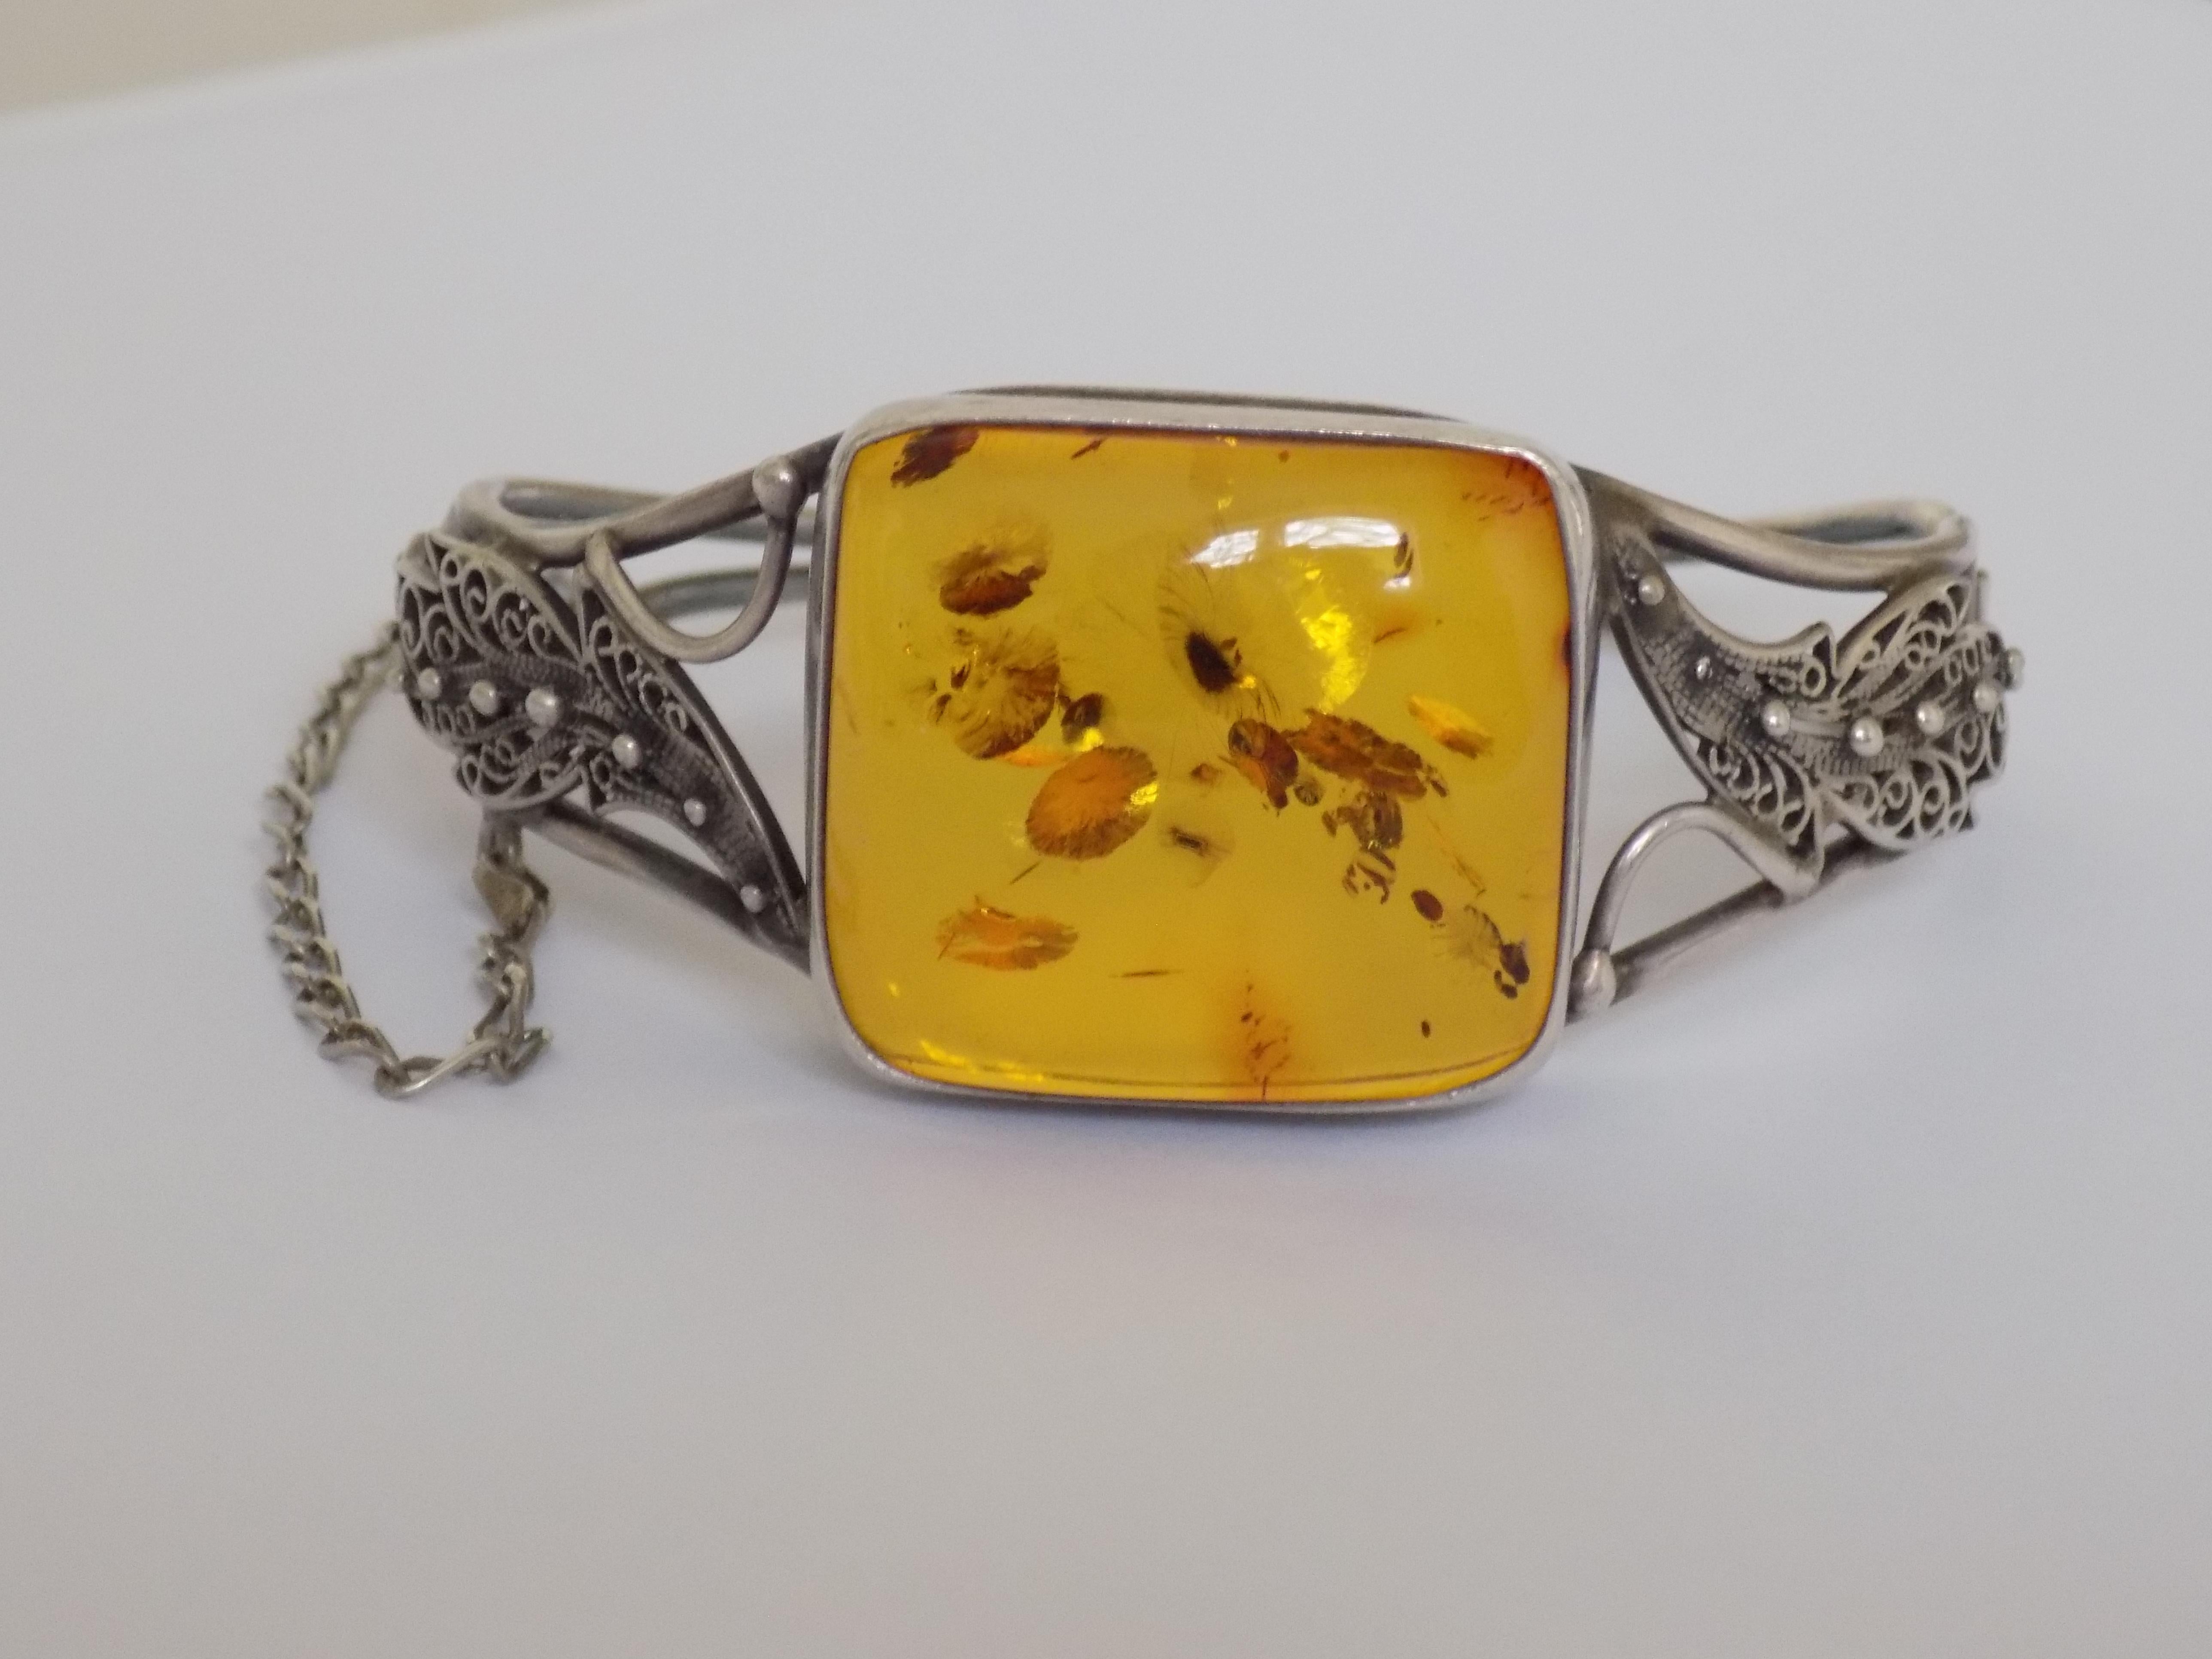 A Lovely Vintage Sterling Silver and Amber bangle. The bangle made in Art Nouvea style. 
The bangle with beautifully crafted Silver Filigree Leaf Motif on the ends.

Diameter inside of the bangle 60mm,
Width of the front 27mm, back 4mm.
Weight